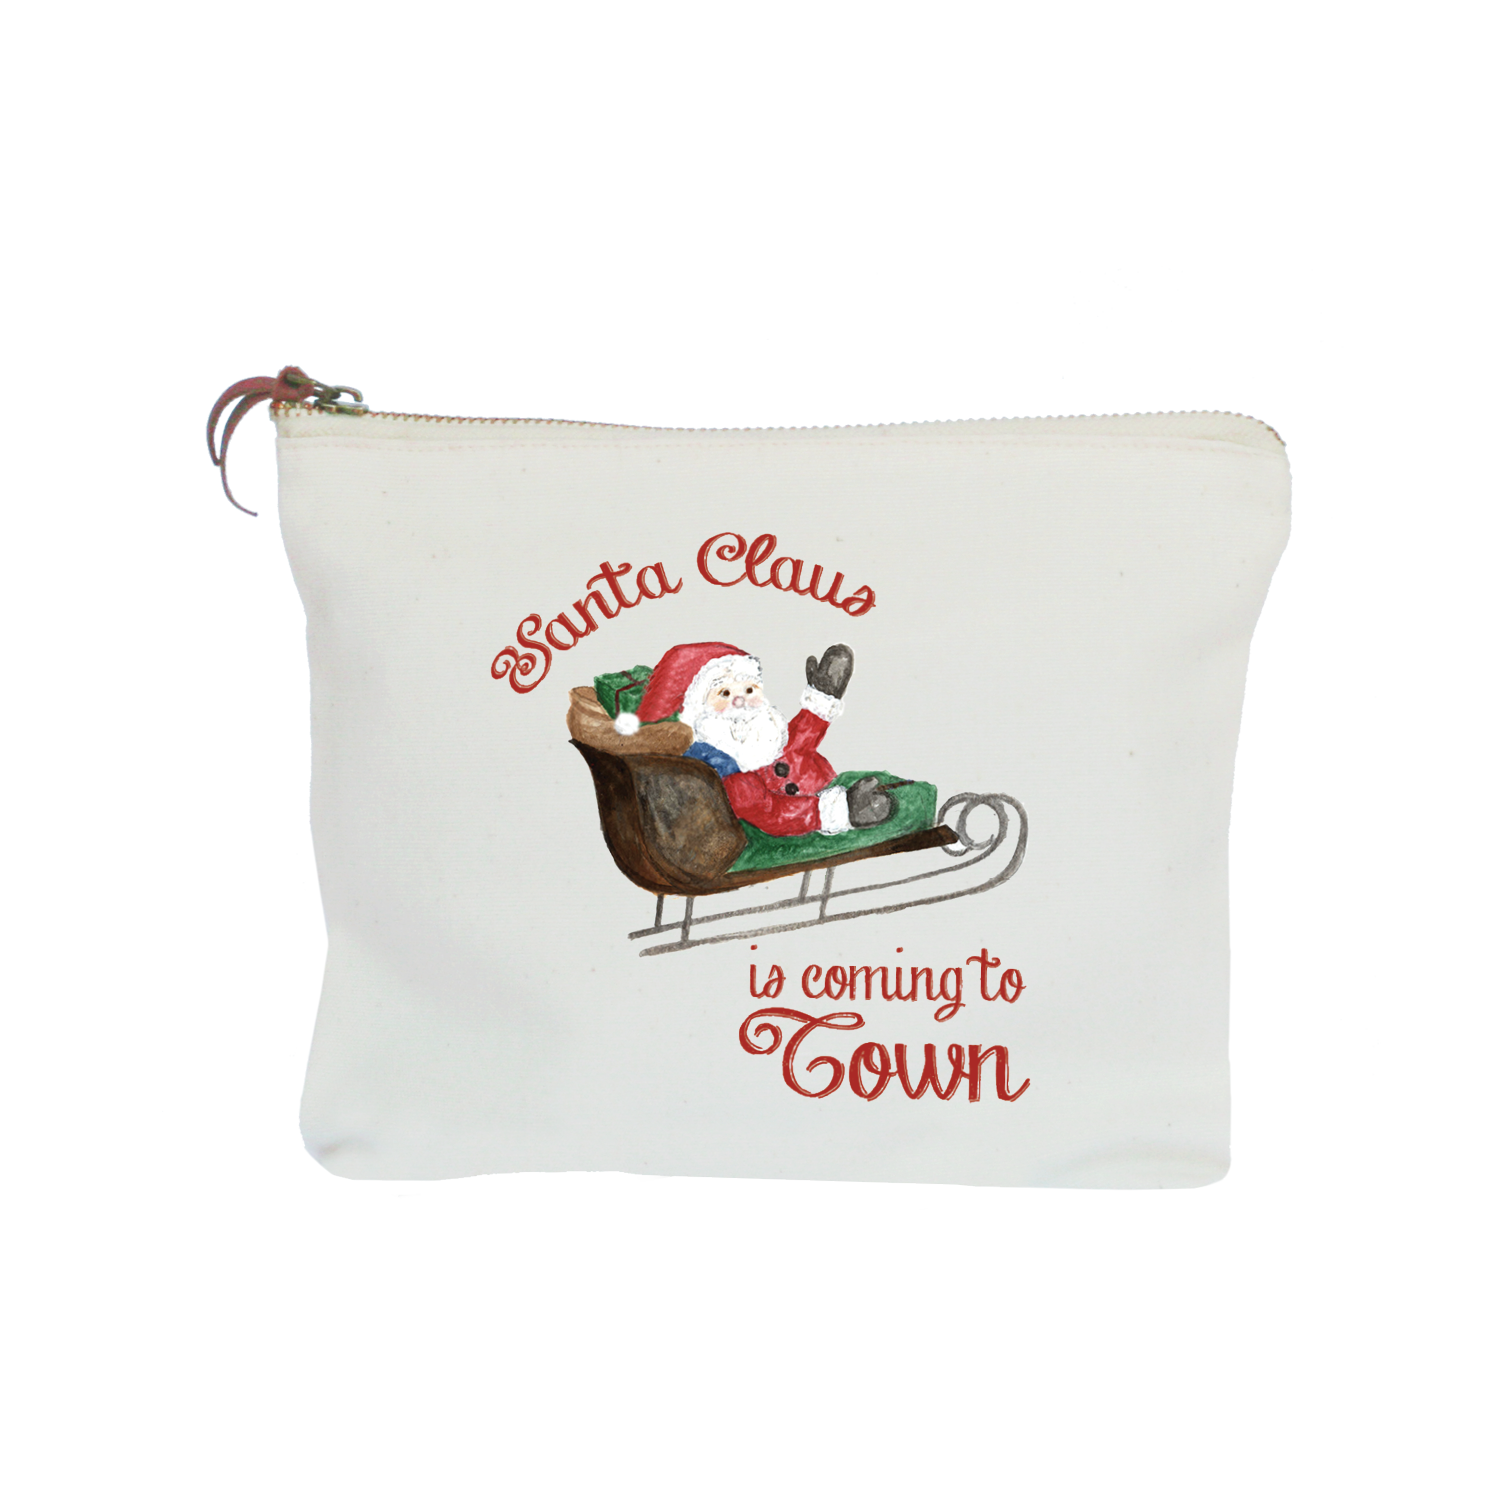 santa claus coming to town zipper pouch